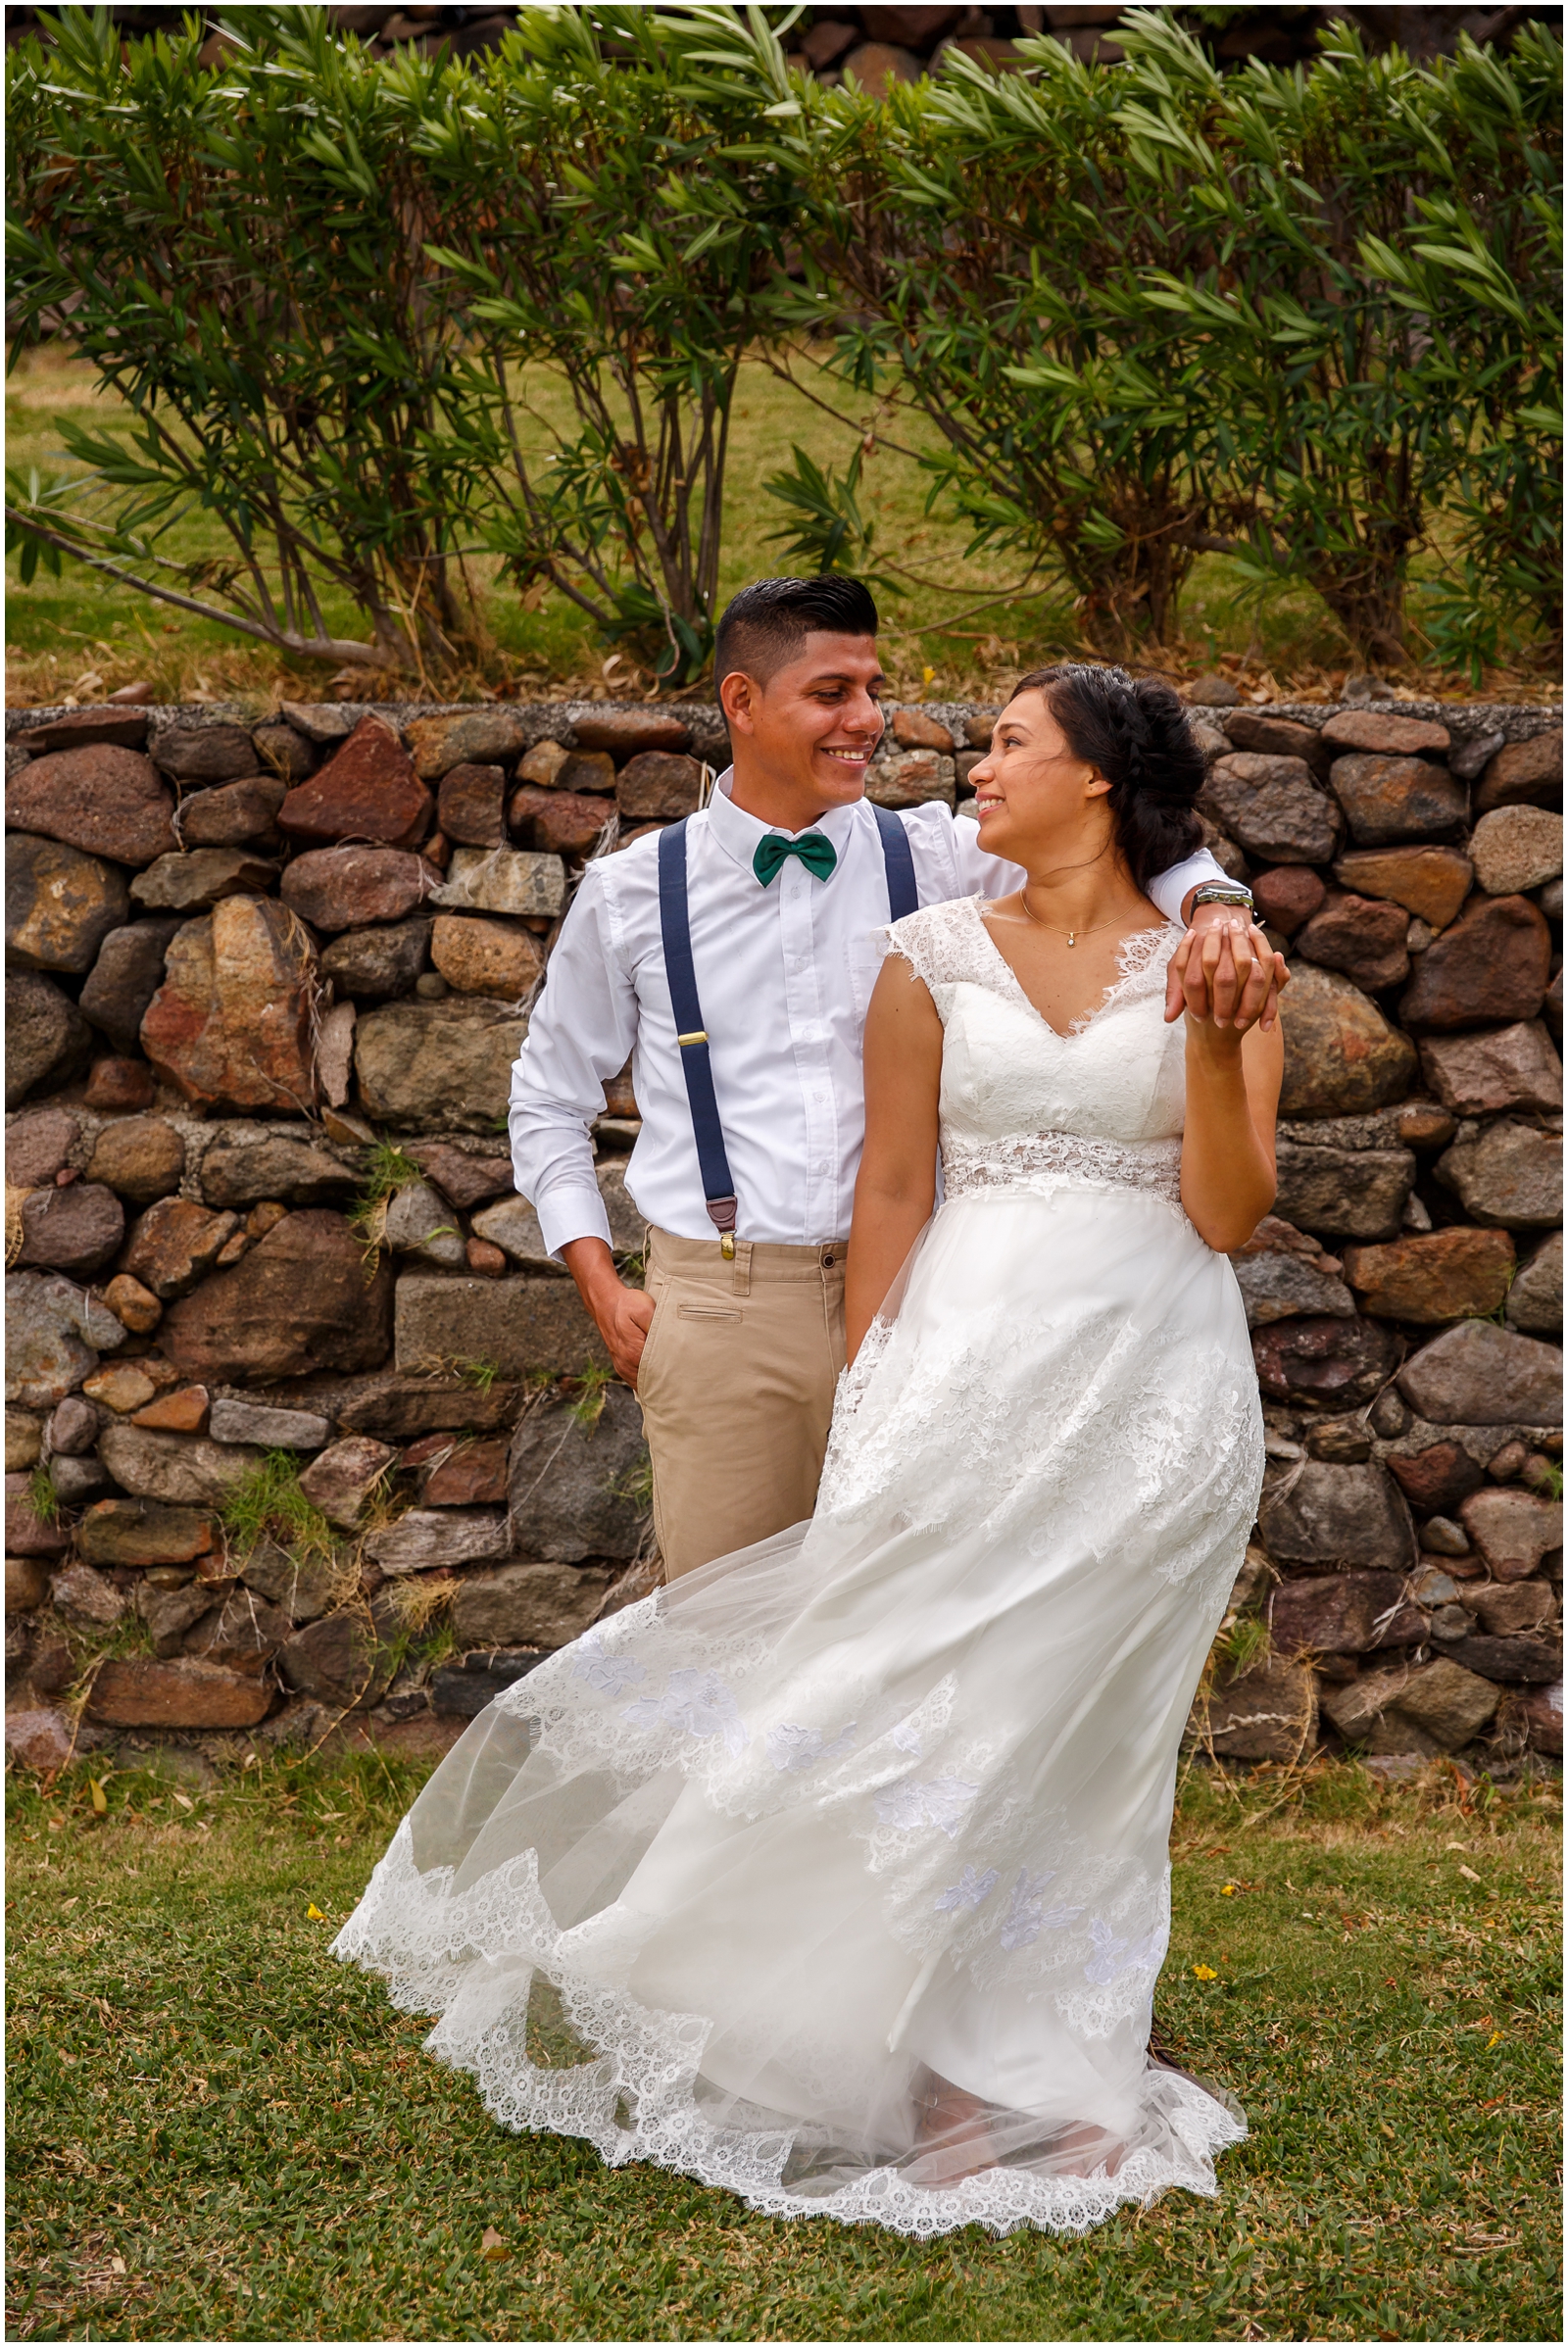 A bride and groom grinning on their wedding day in Nicaragua.